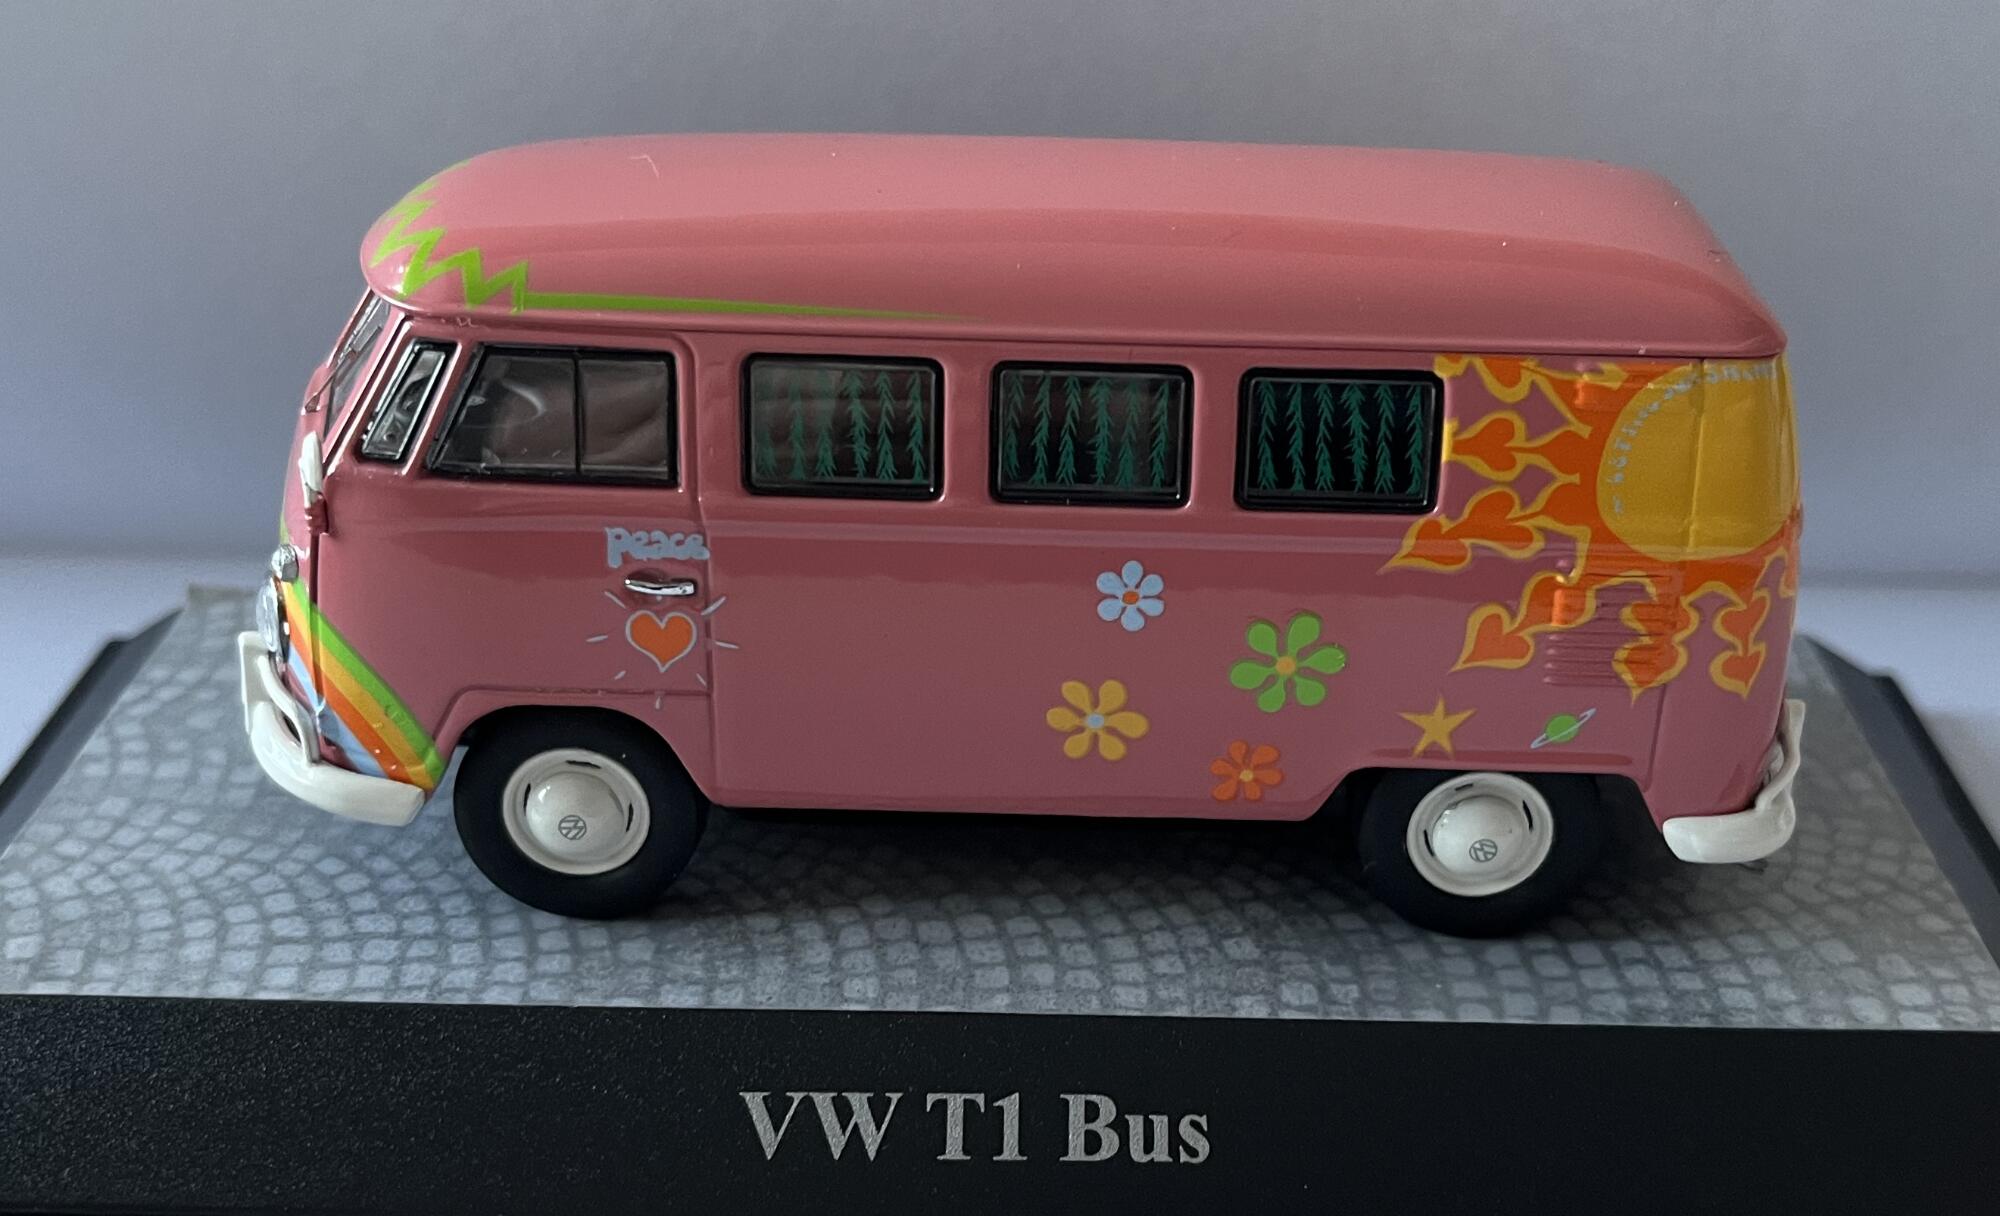 VW T1 Bus in pink flower power, love and peace, 1:43 scale model from Premium ClassiXXs, PRE13851, limited edition